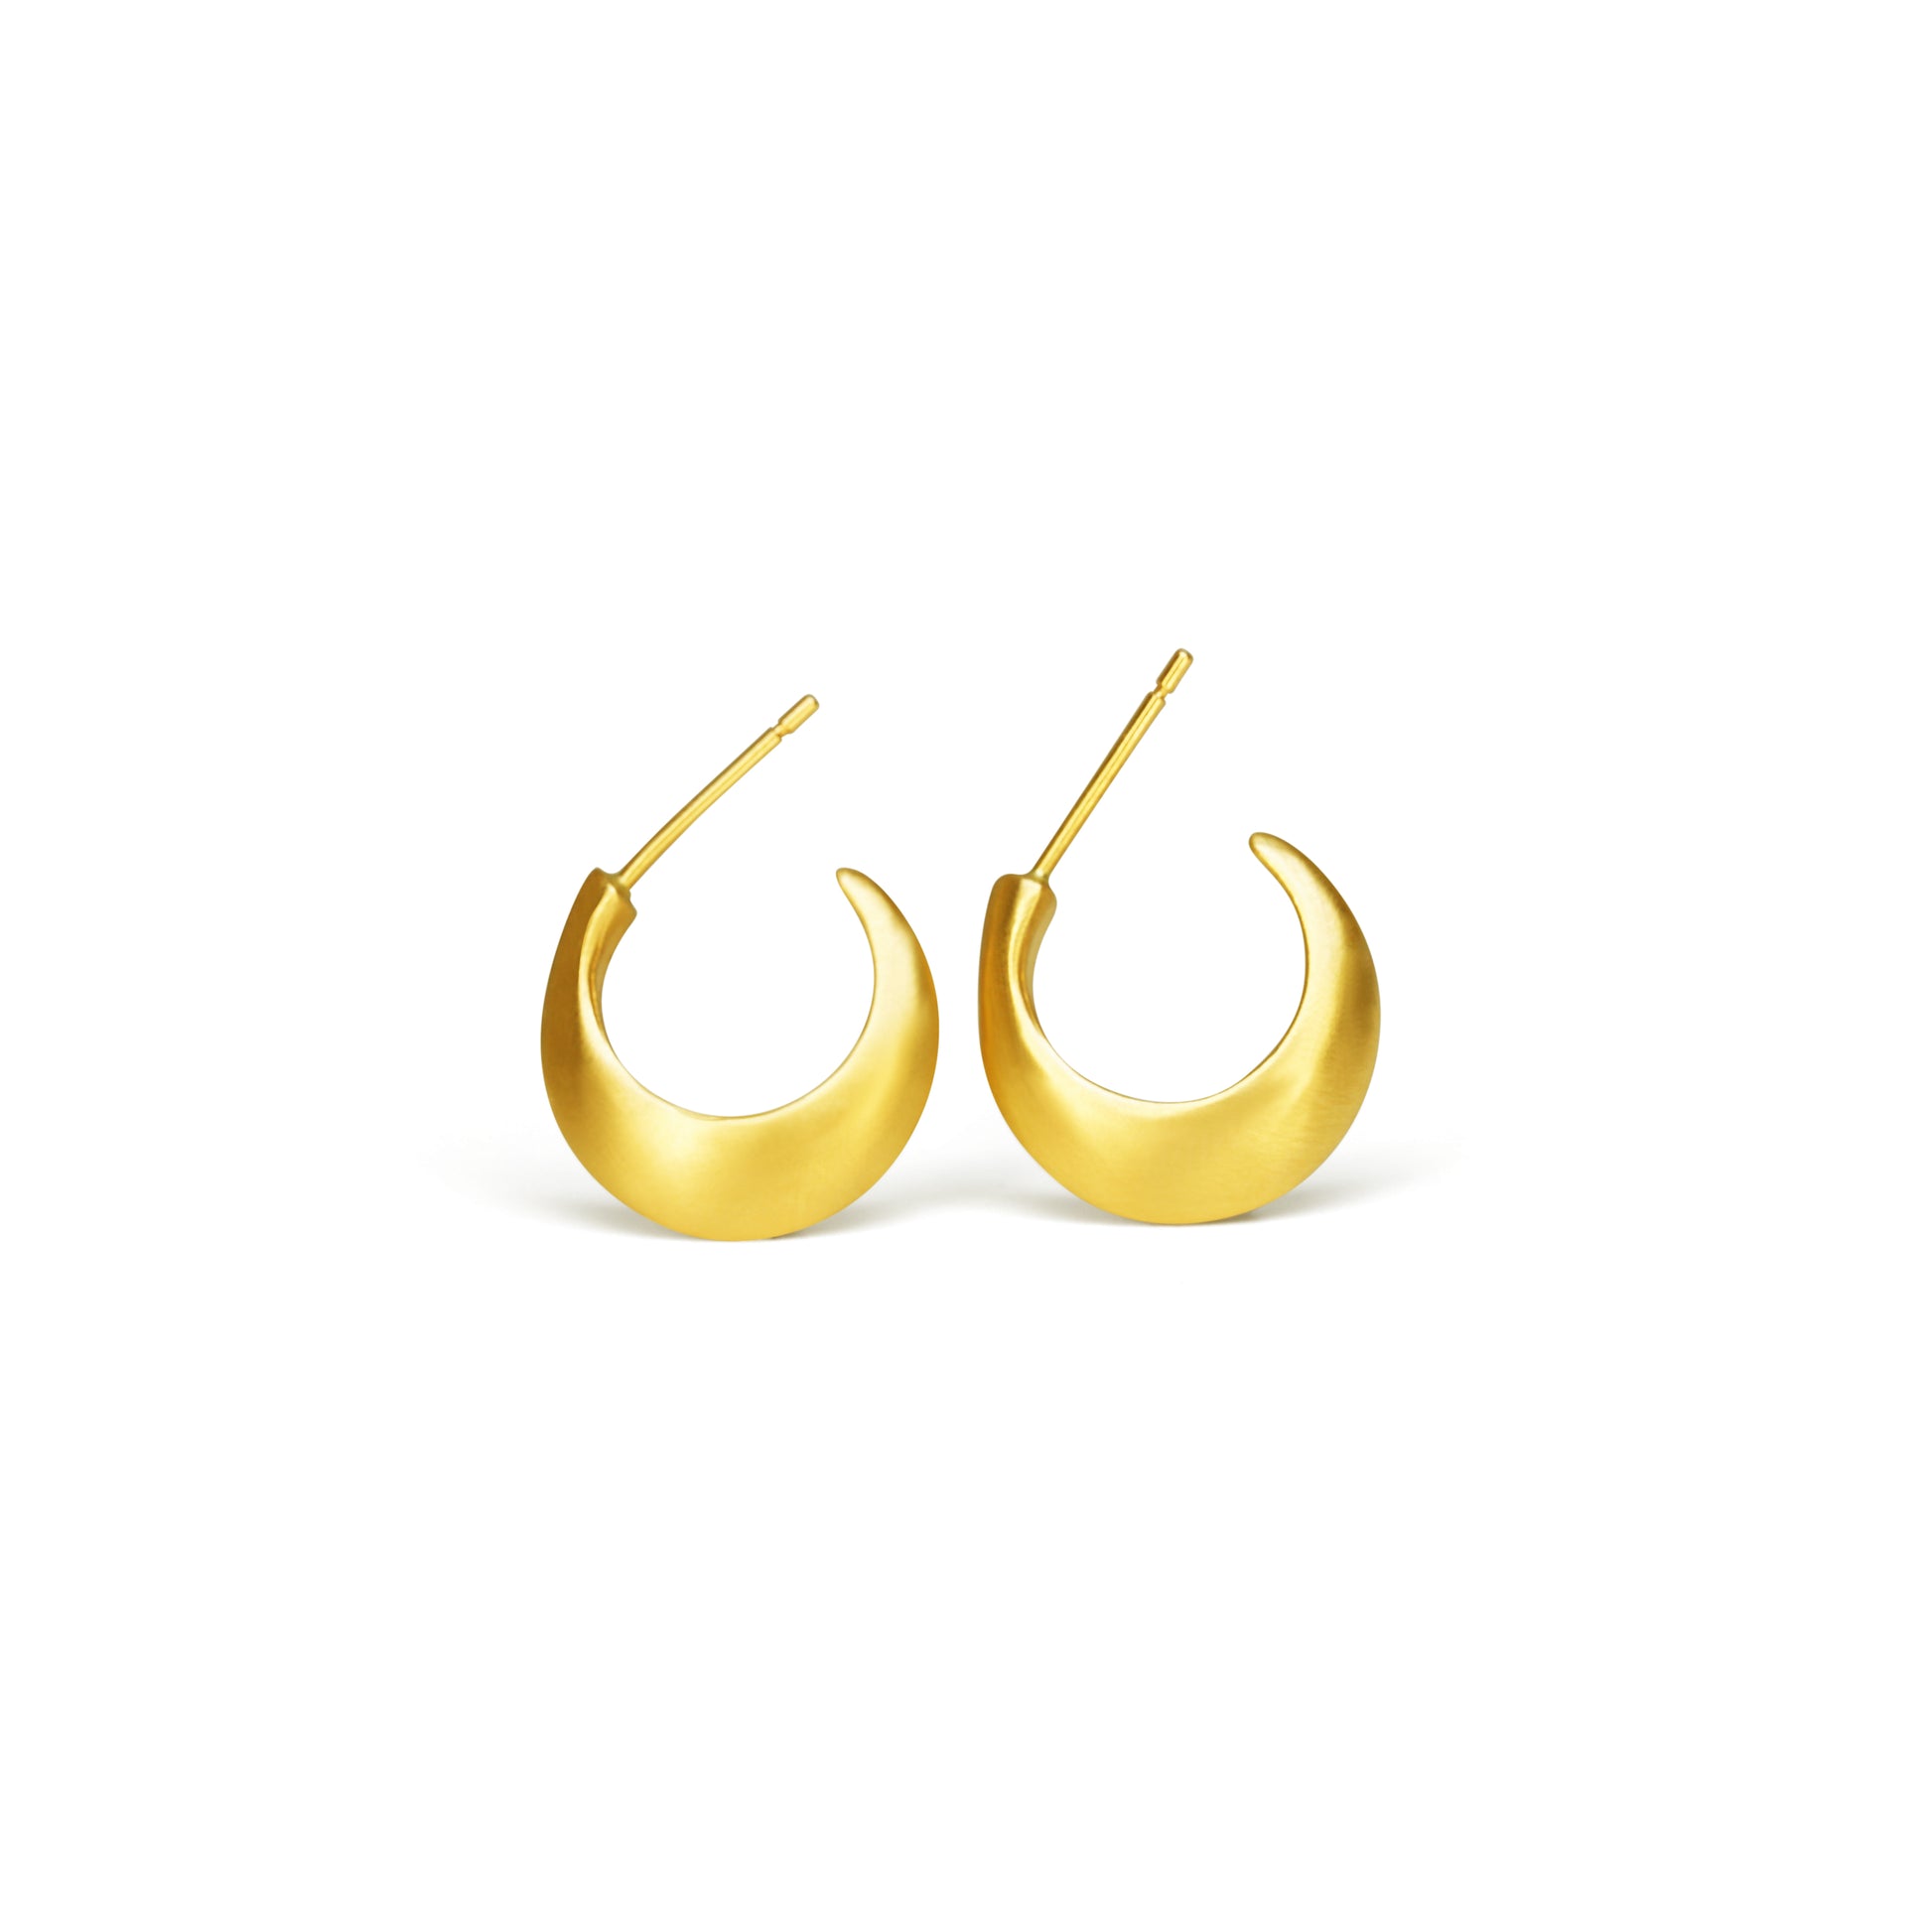 Step up your earring game with our Small Half Moon Hoops. With their versatile design, these hoops are perfect for any occasion. Easy to wear and a classic style. 14k Yellow Gold Satin Finish HxW: 14.04mm x 3.37mm